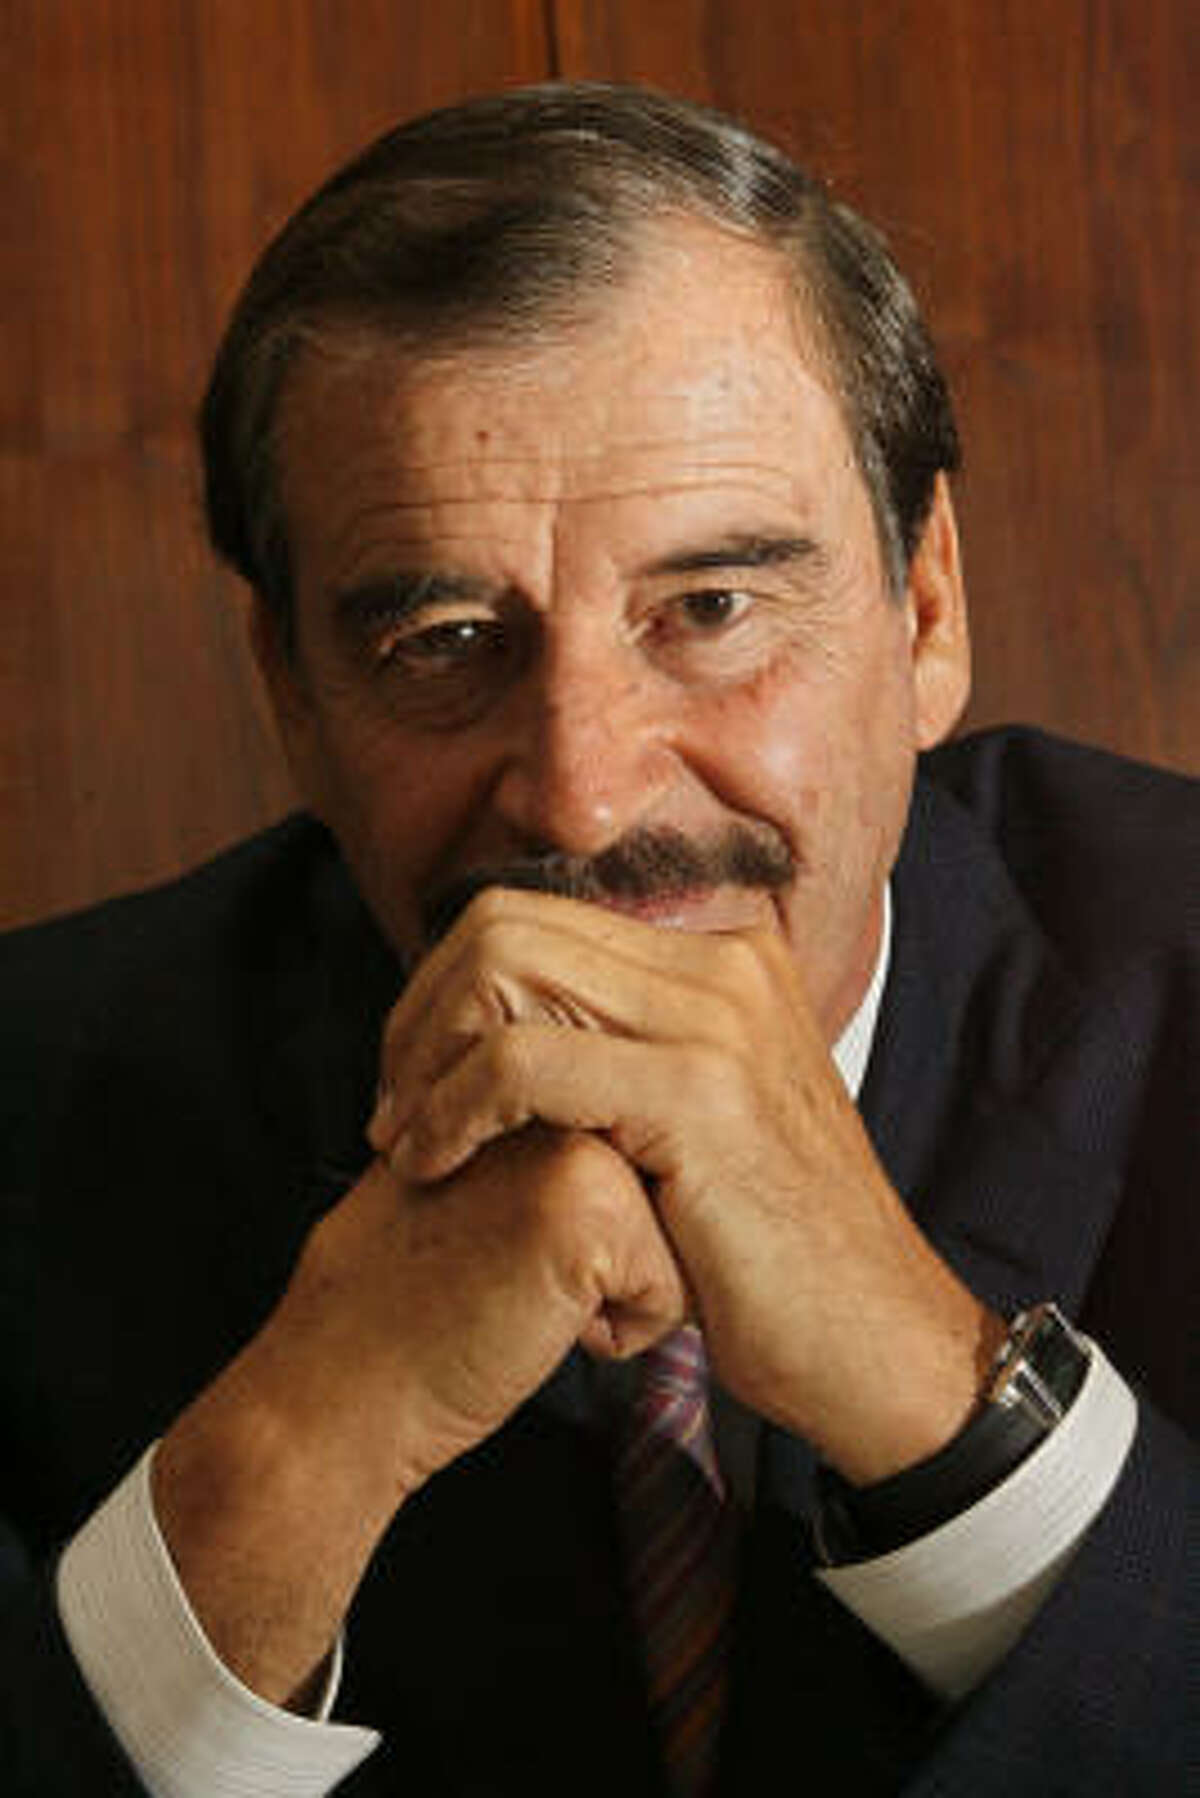 Former Mexican President Vicente Fox speaks to the Houston Chronicle editorial board Monday in Houston.